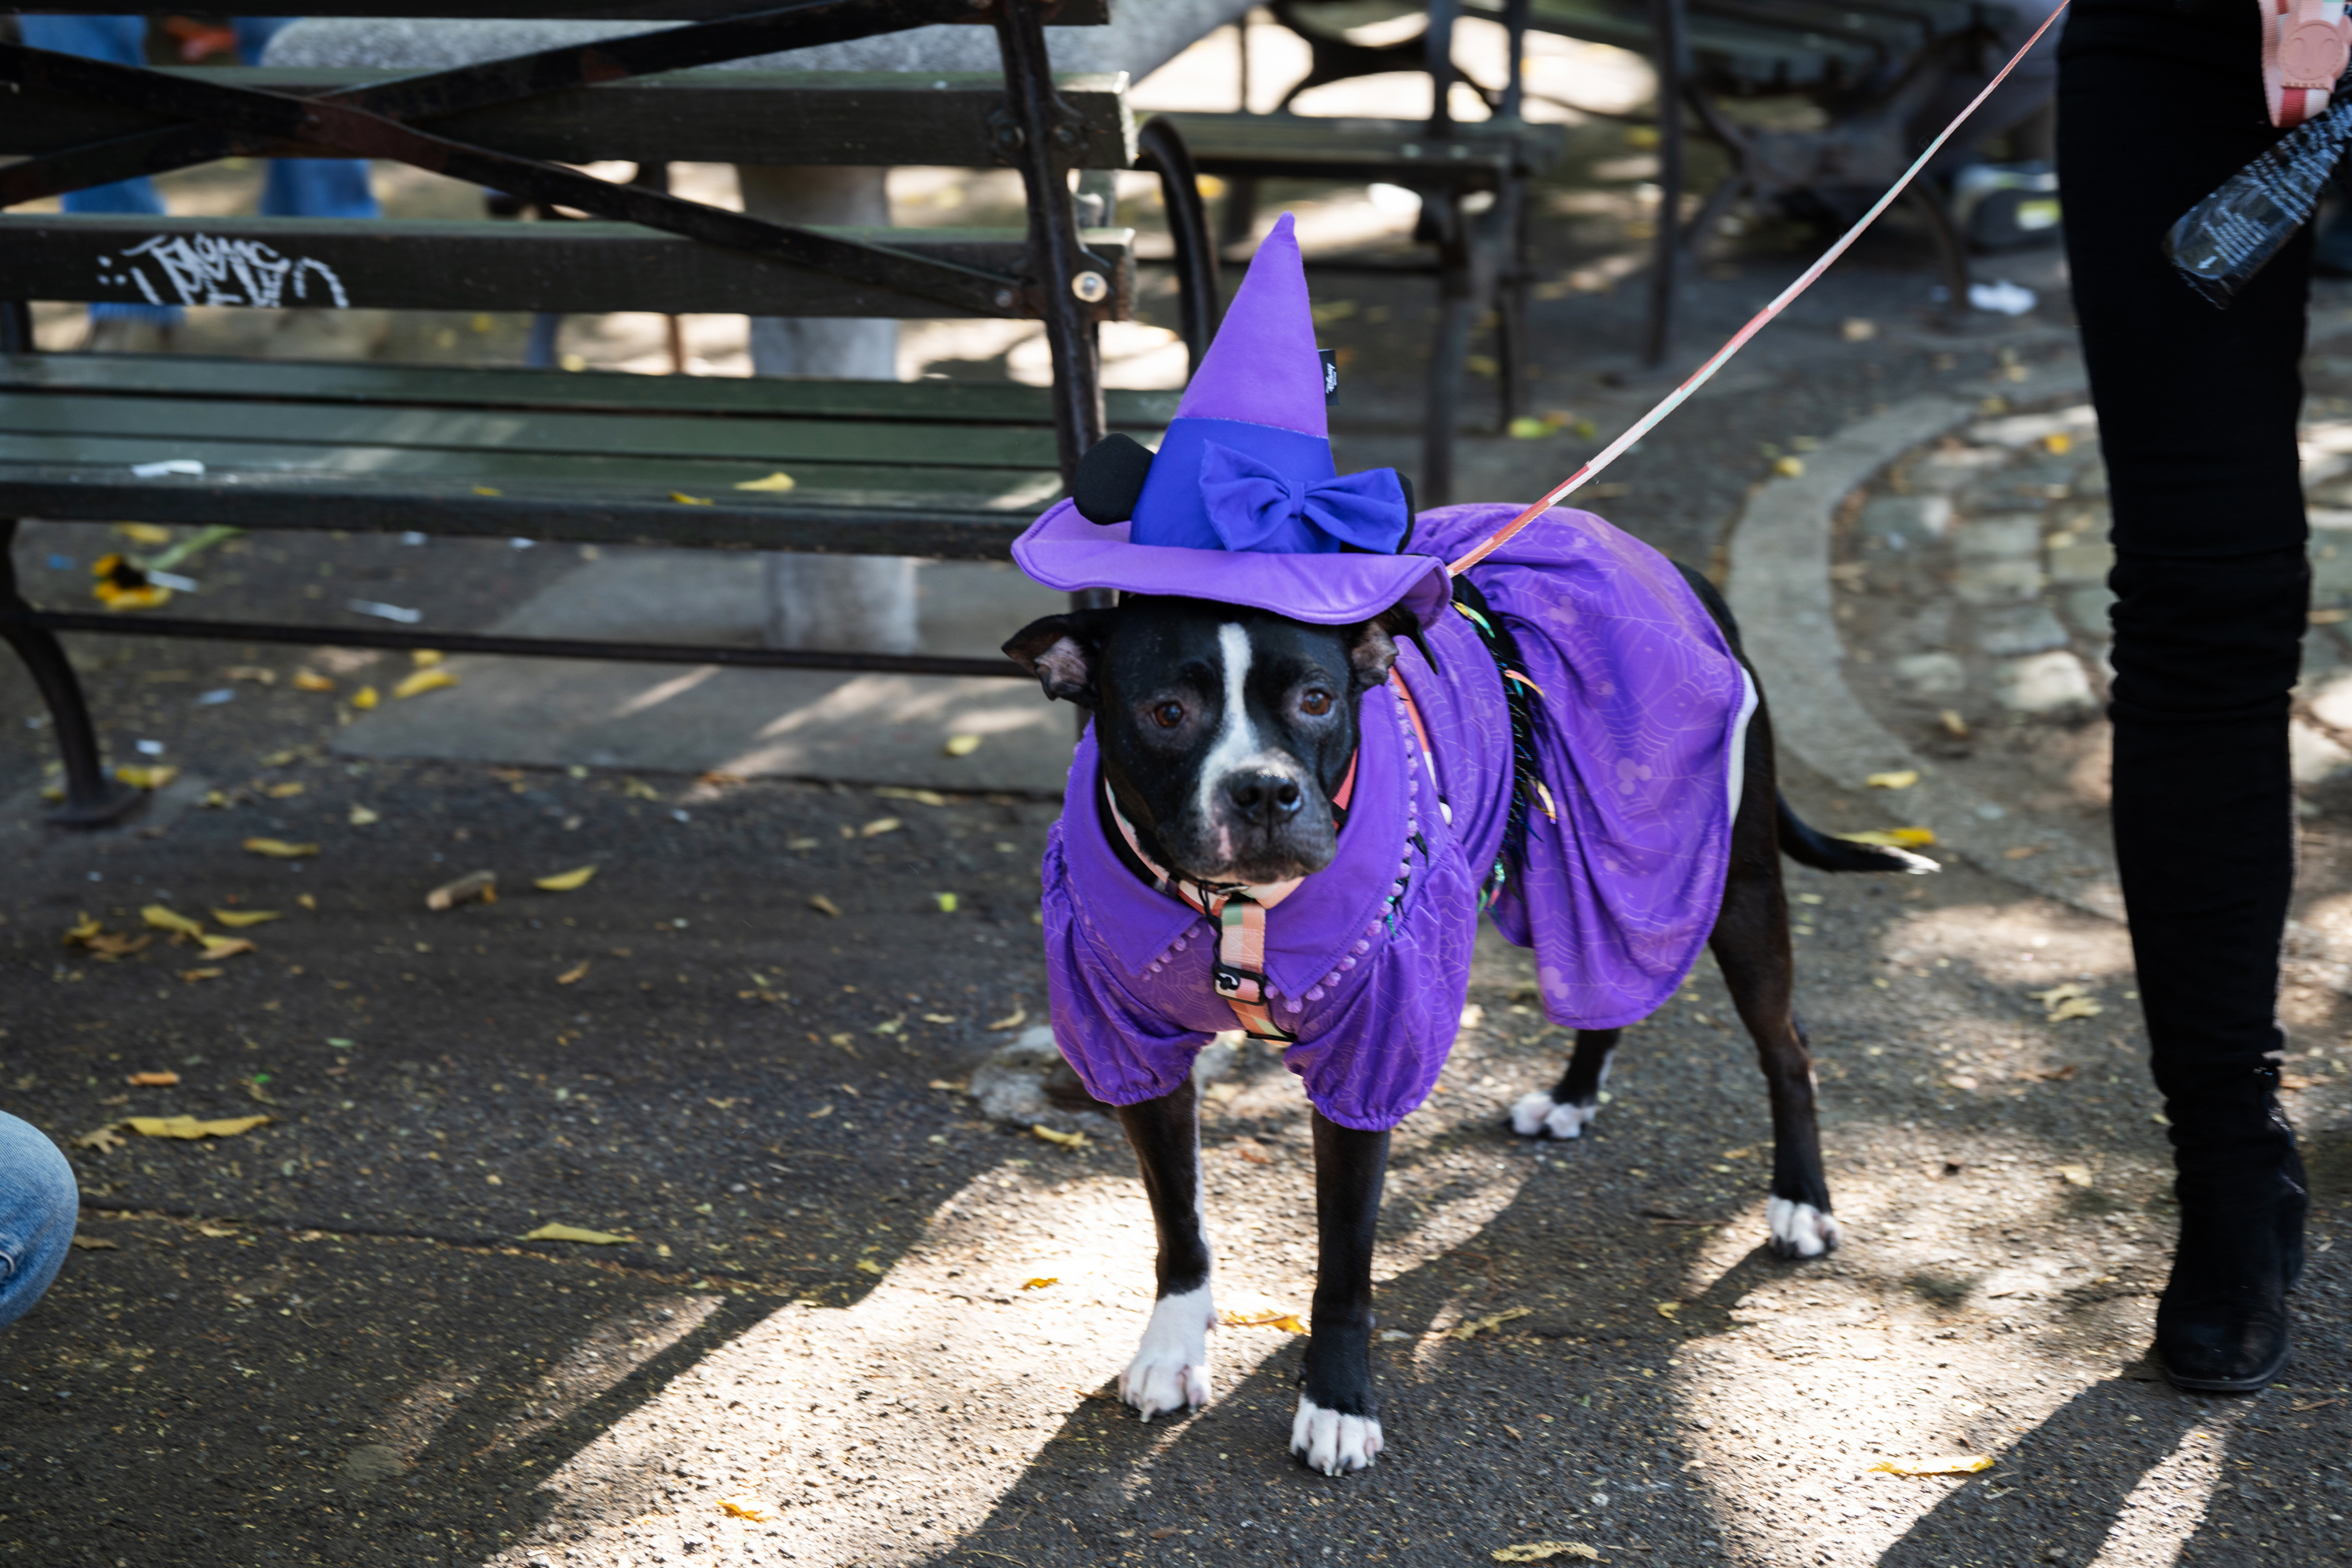 why do people dress up thier dogs as KKK for holloween? :freak